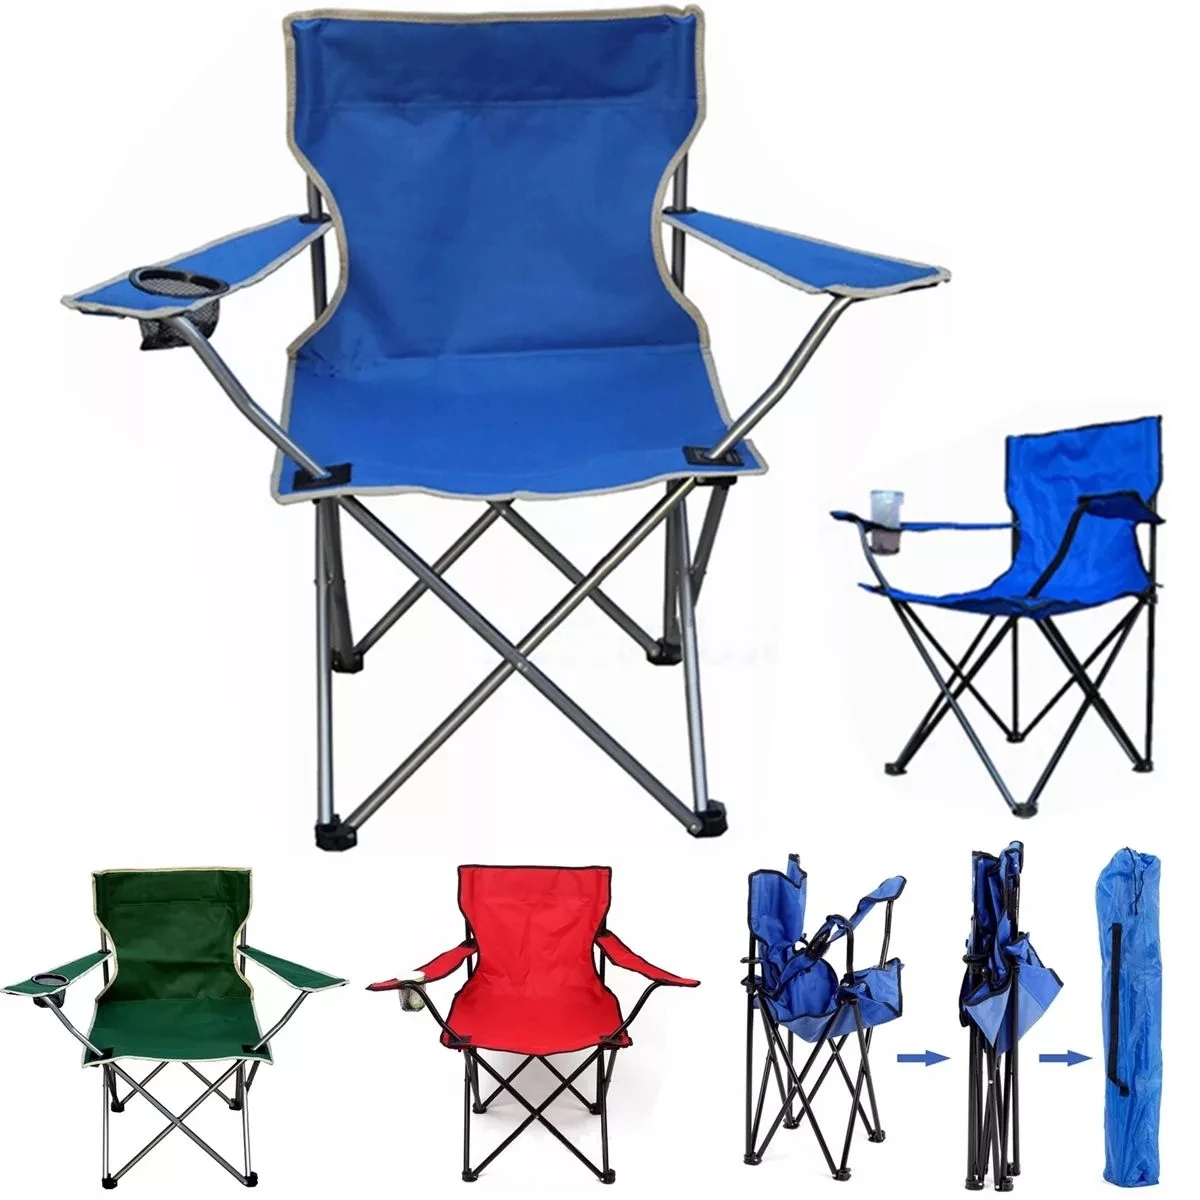 1/2x FOLDING CAMPING CHAIR LIGHTWEIGHT SEAT FISHING BEACH CHAIR WITH CUP HOLDER 